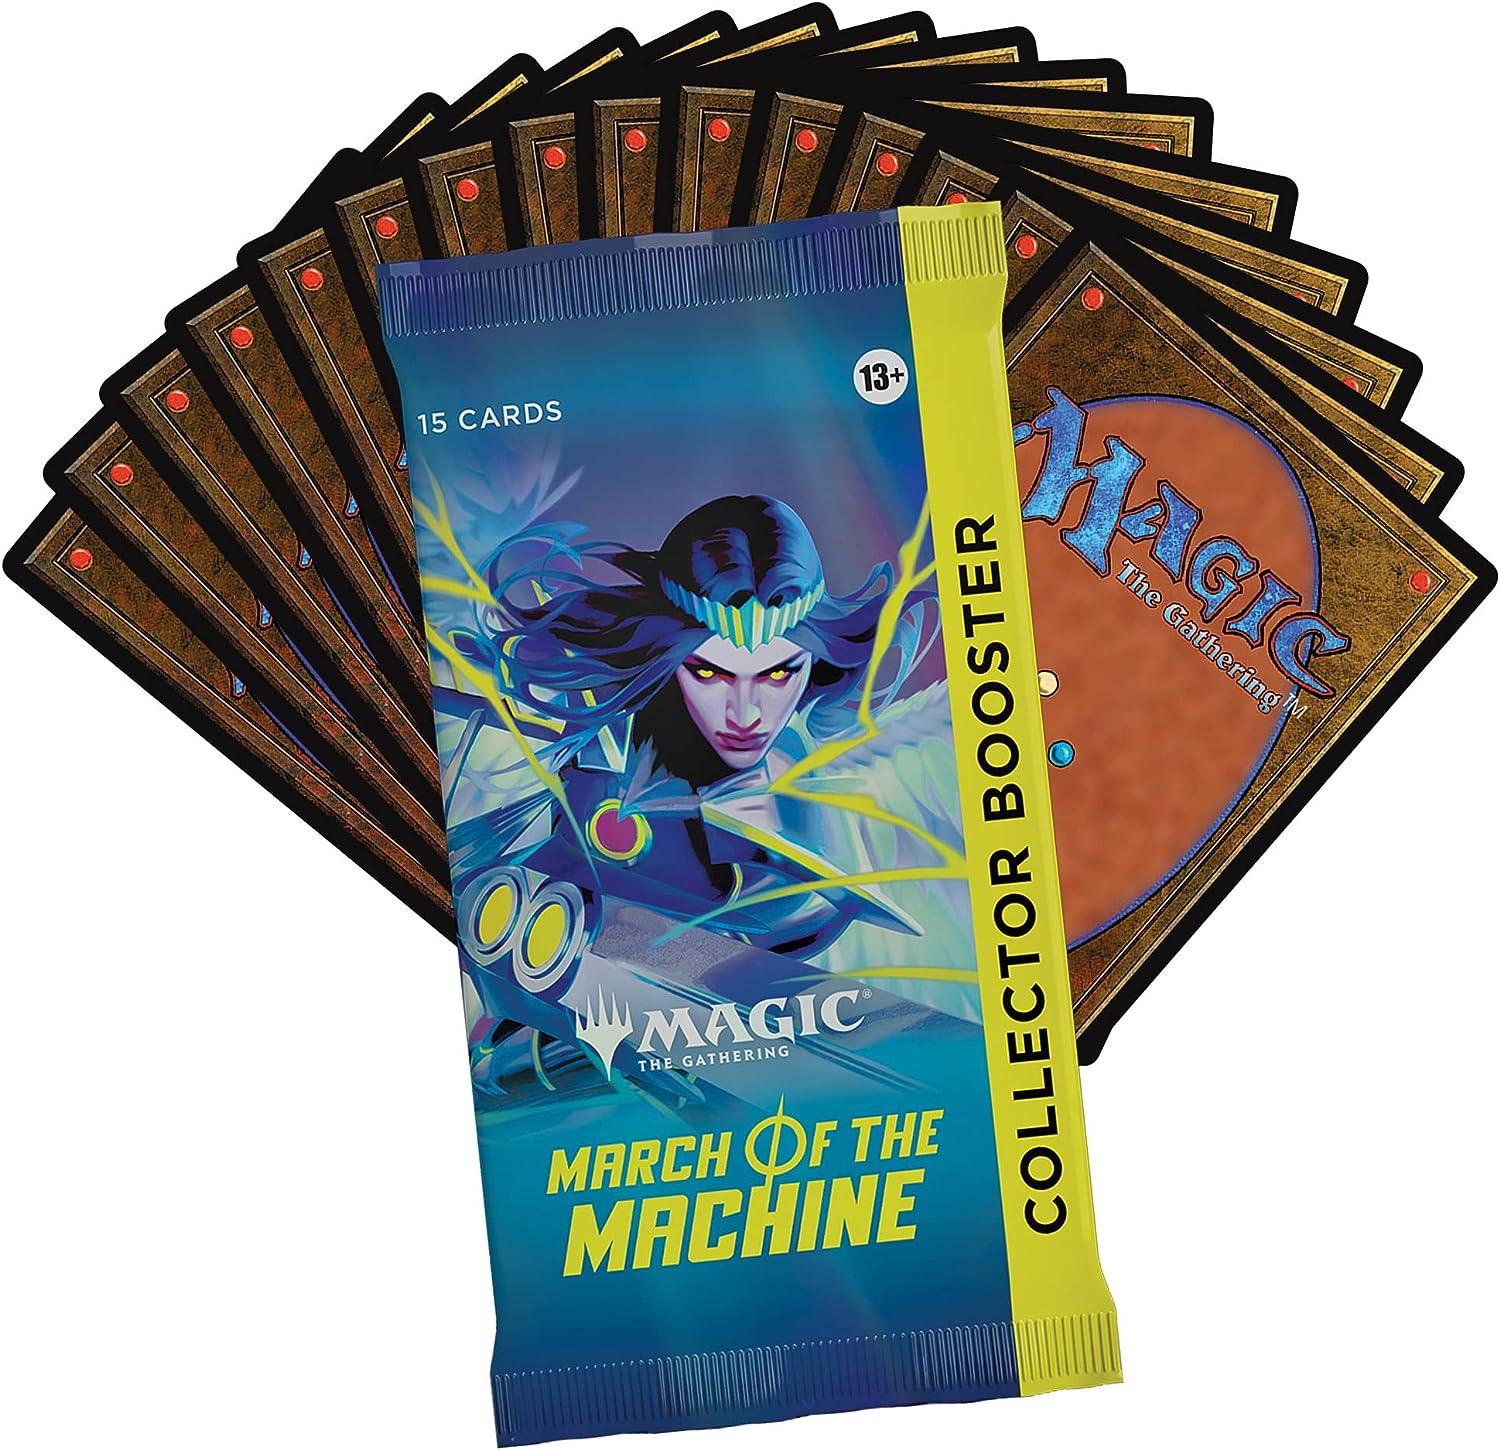  Magic: The Gathering March of the Machine Collector Booster Box